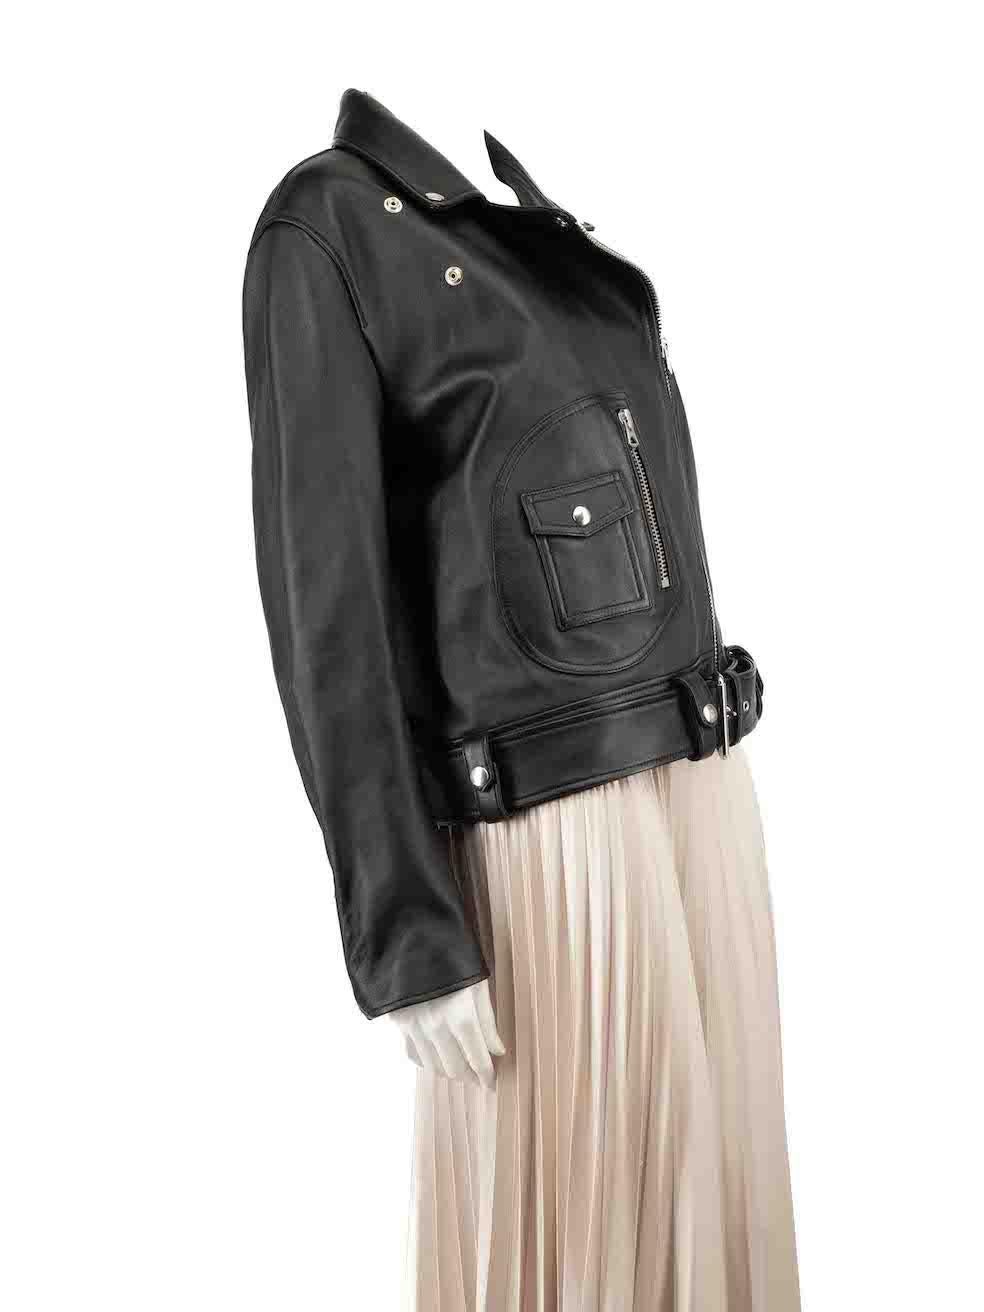 CONDITION is Never worn, with tags. No visible wear to jacket is evident on this new Acne Studios designer resale item.
 
 
 
 Details
 
 
 New Merlyn model
 
 Black
 
 Leather
 
 Biker jacket
 
 Front asymmetric zip closure
 
 Zipped cuffs
 
 1x